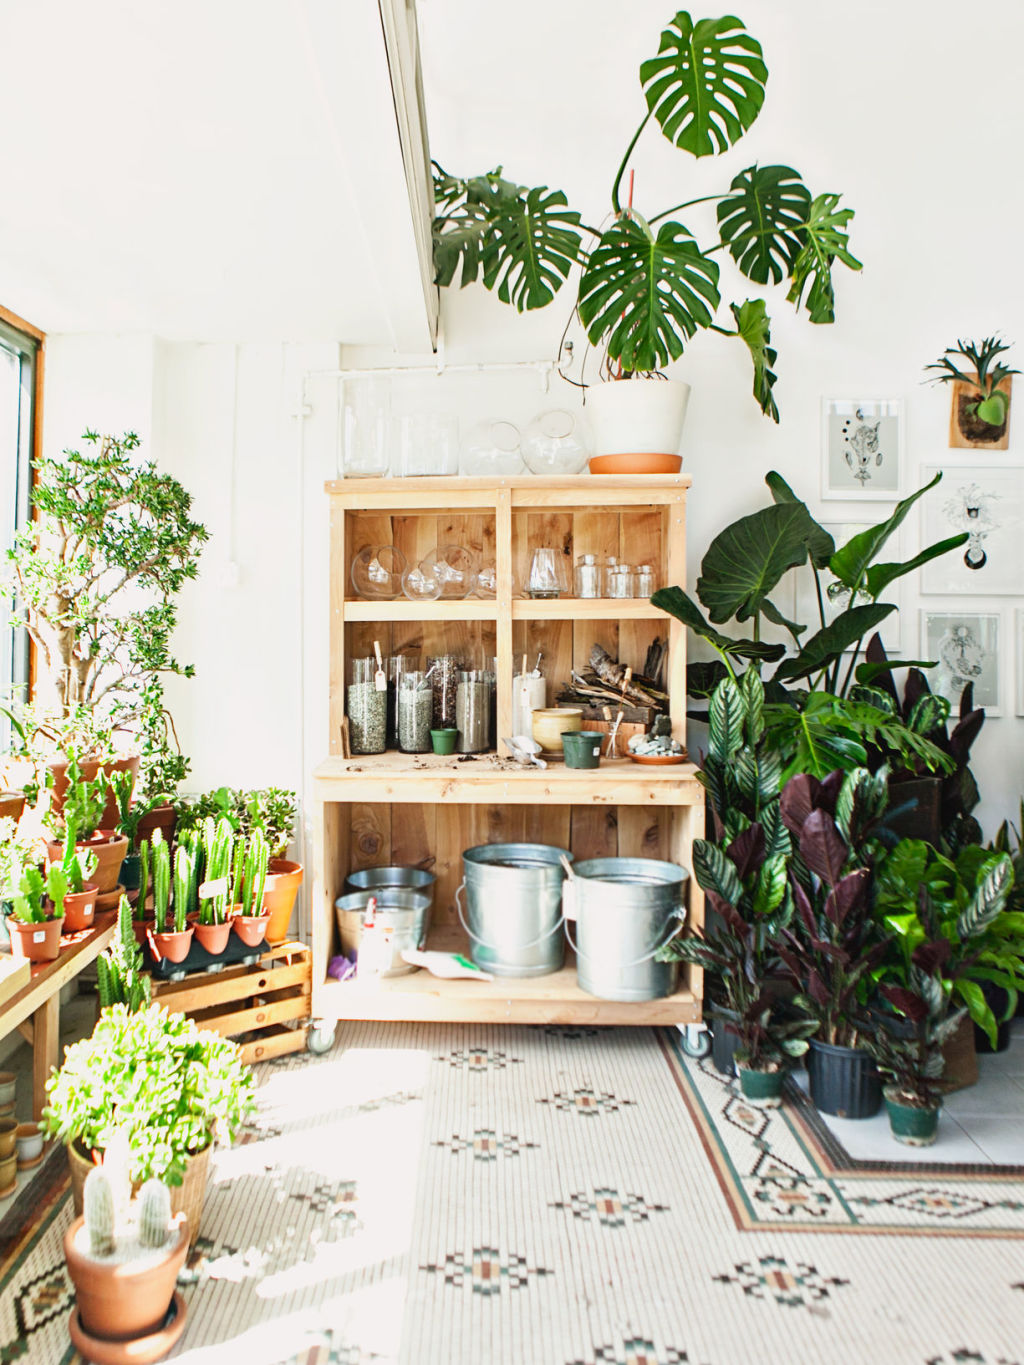 It's time to take a look at your indoor plants. Photo: Stocksy